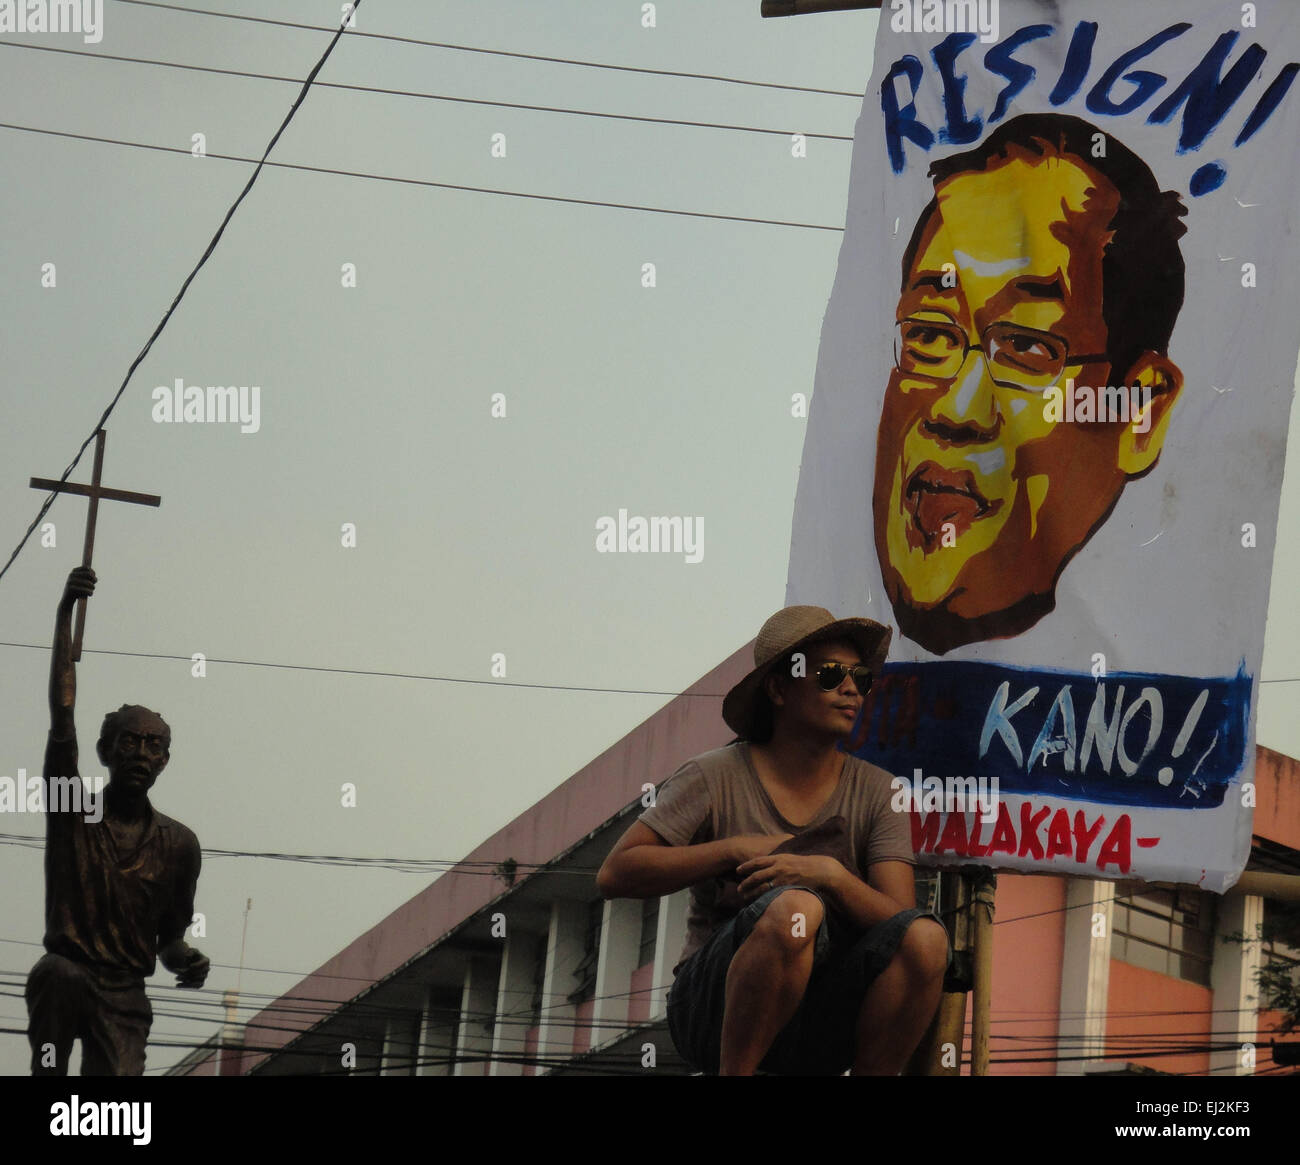 Manila, Philippines. 20th Mar, 2015. A Filipino activist takes a rest beside a banner calling for the resignation of Philippine President Benigno Aquino III, during a rally at Mendiola. President Aquino is facing calls for his removal over the botched anti-terror operation last January 25 in Mamasapano, Maguindanao to hunt wanted Malaysian bombmaker Zulkifri bin Hir, alias Marwan, that resulted in the deaths of 44 police commandos. Credit:  Richard James Mendoza/Pacific Press/Alamy Live News Stock Photo